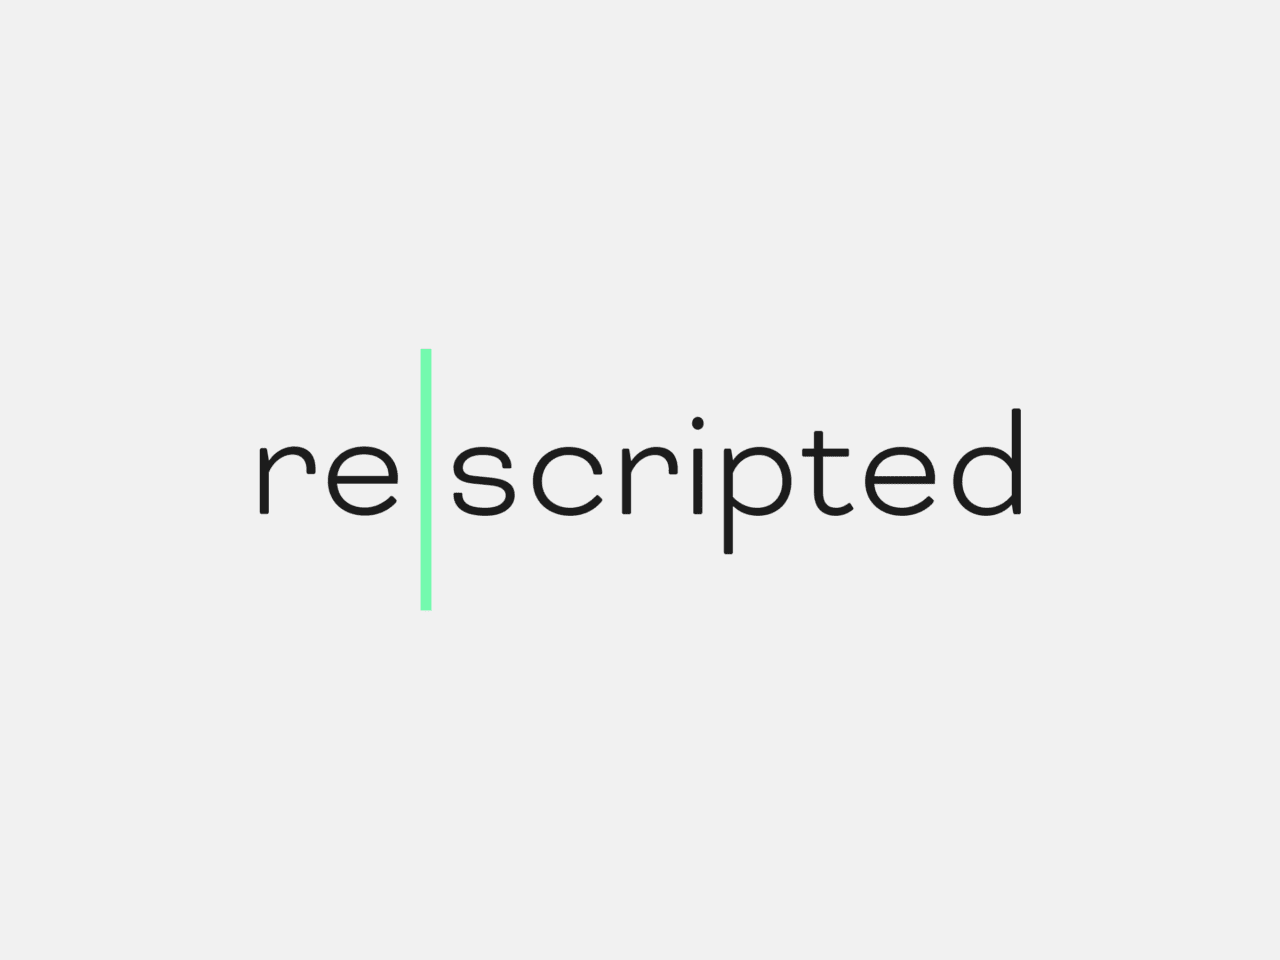 On a pale background is the black text 're|scripted'. There is a green line between 're' and 'scripted'.